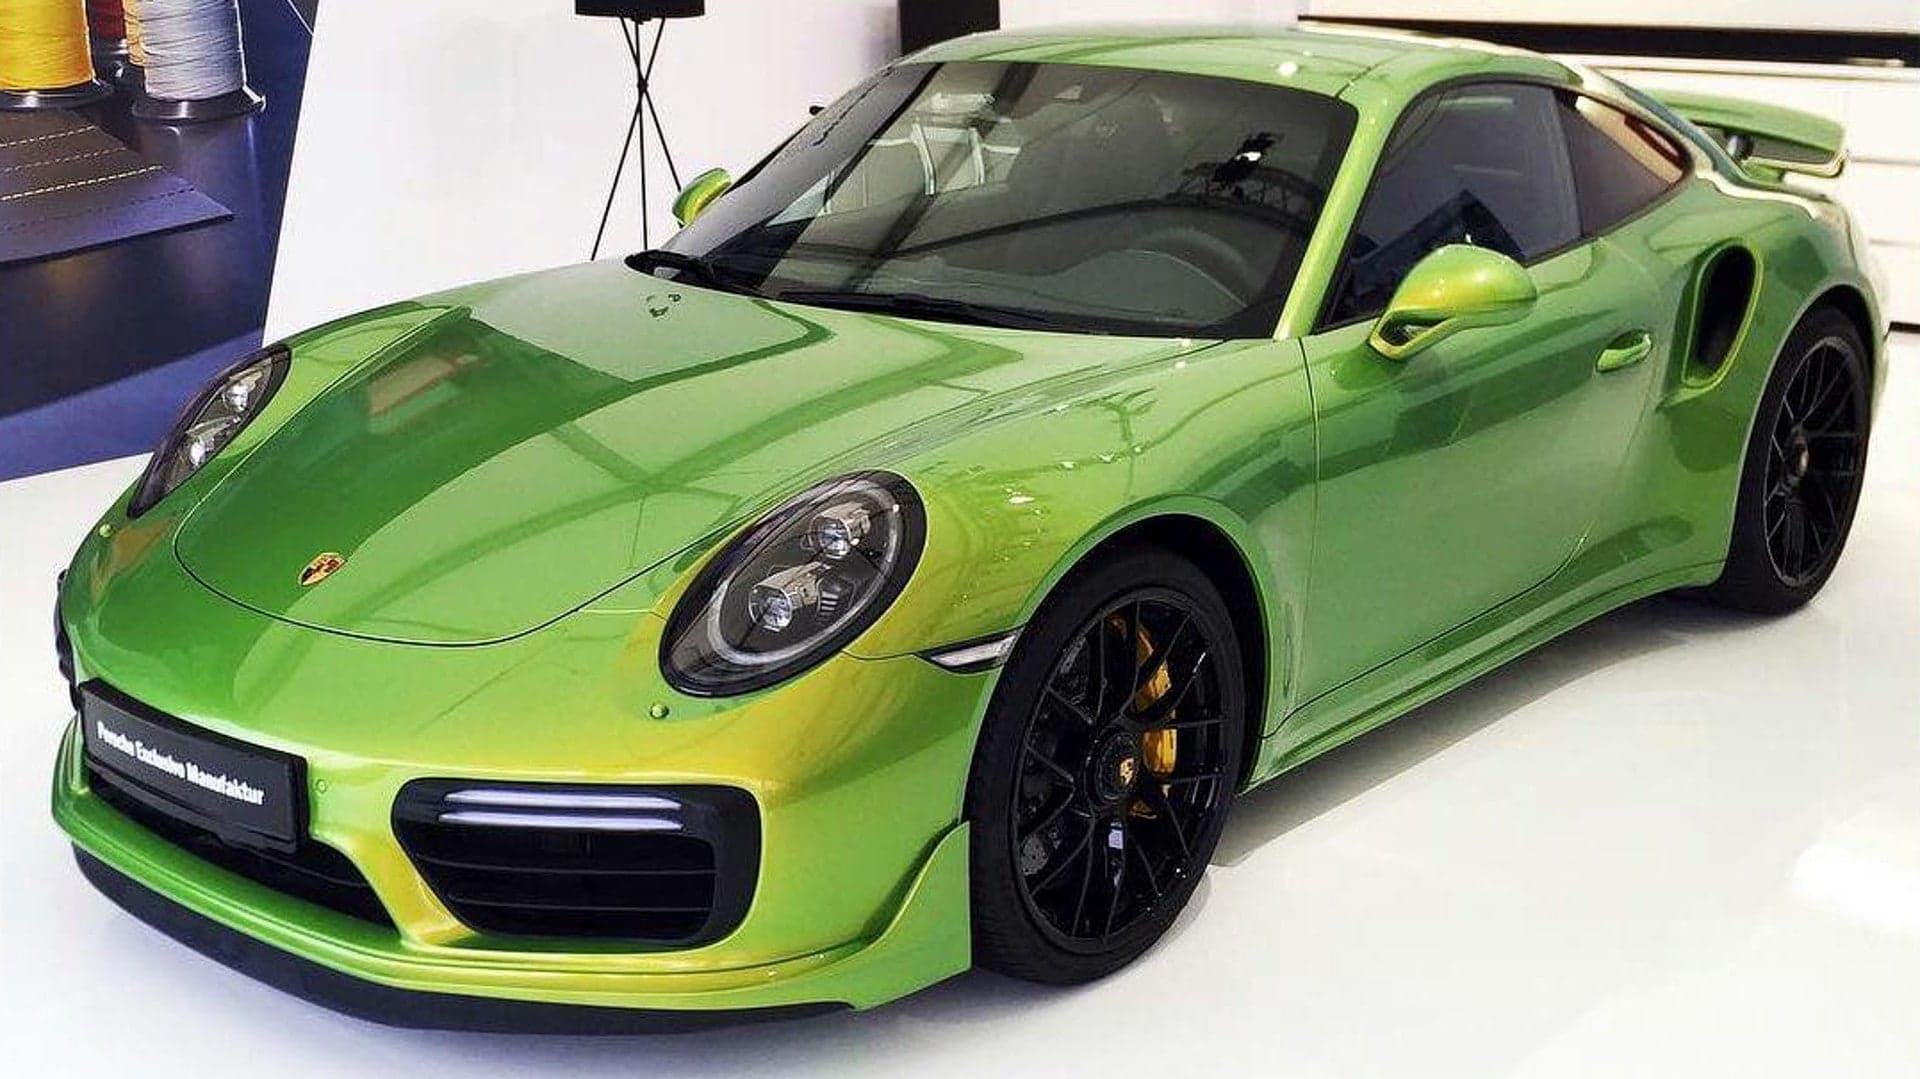 There’s an Ultra-Limited $97,000 Paint Option Available for the Porsche 911 Turbo S